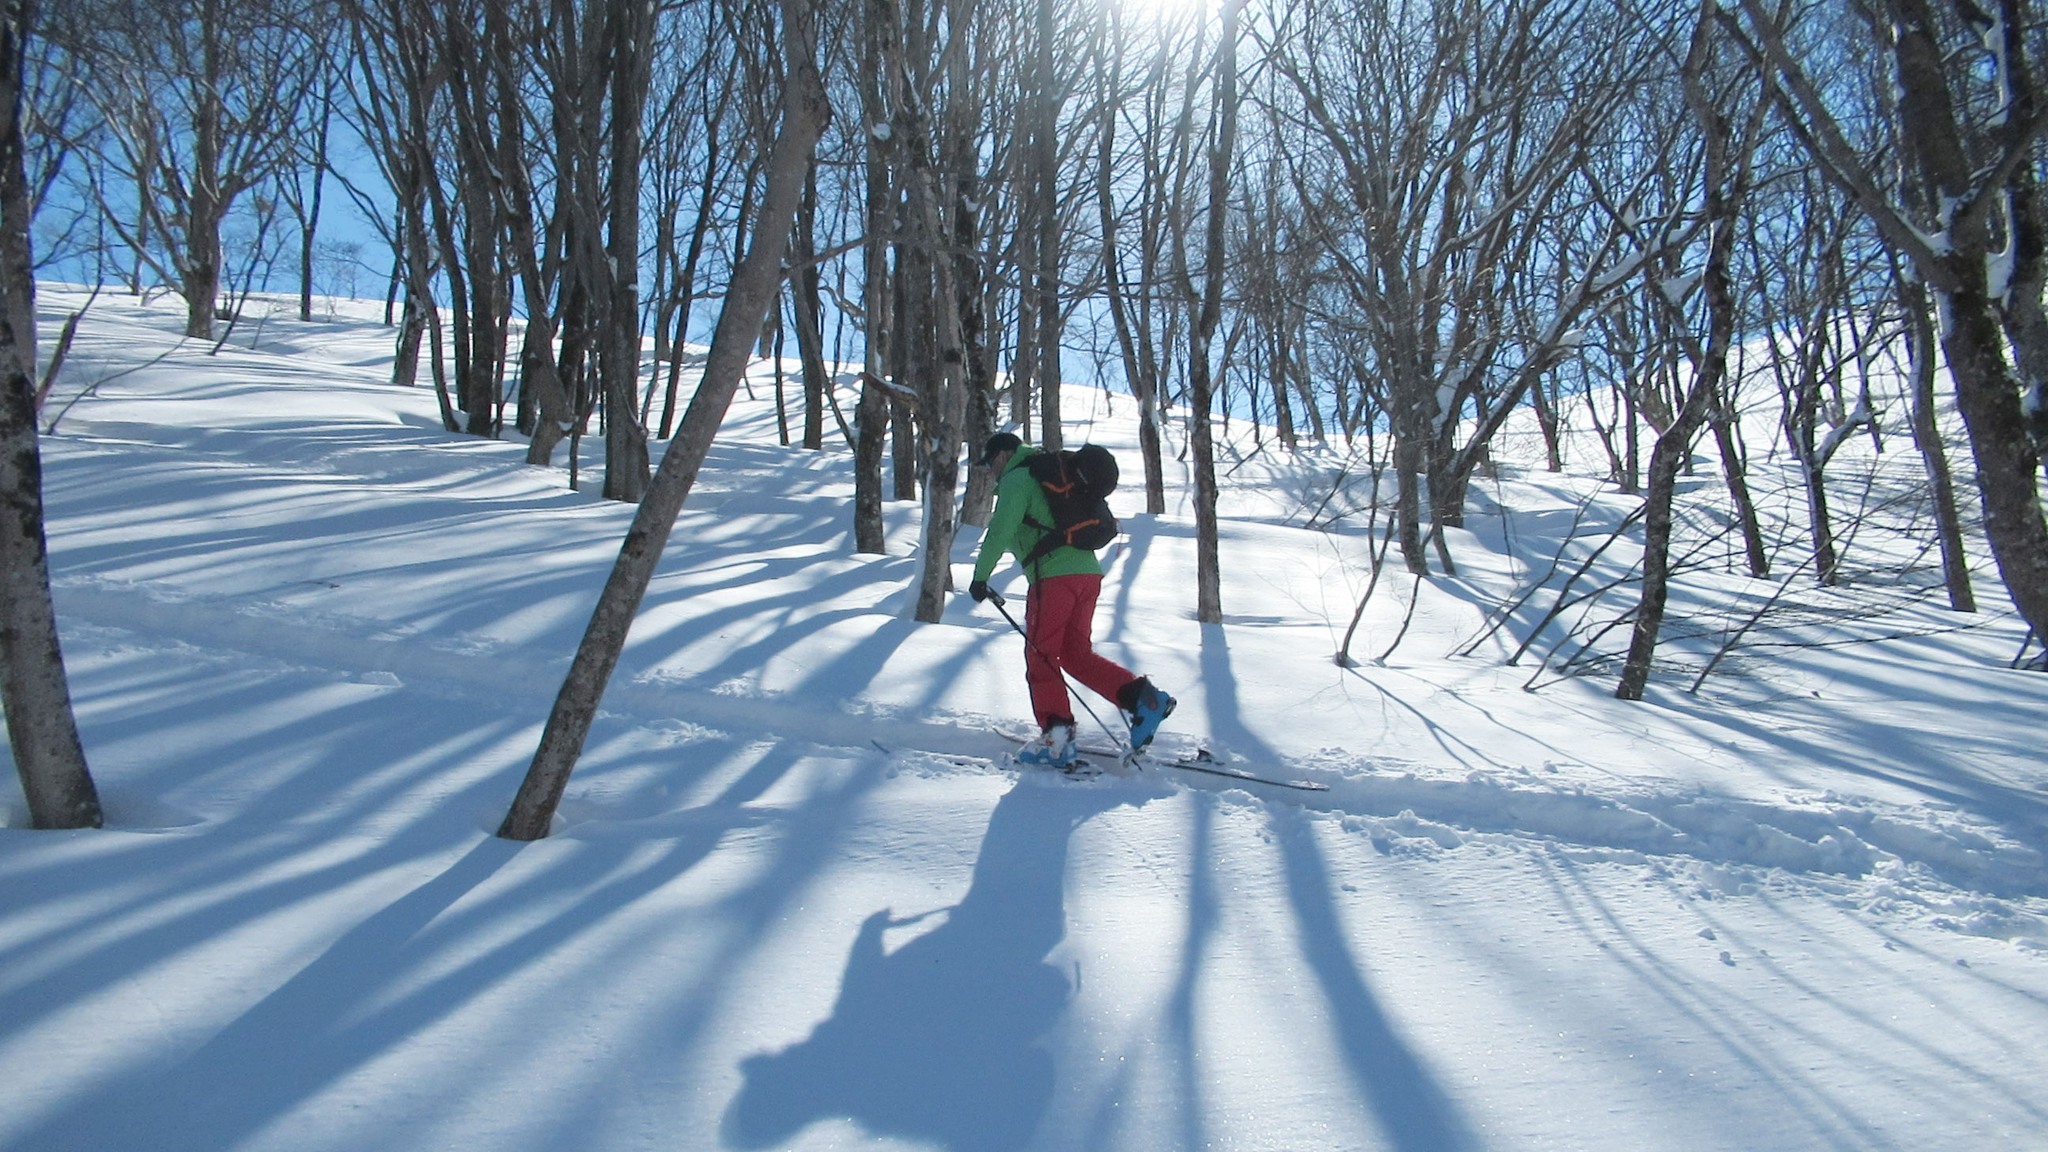 Options for ski touring on stormy or sunny days